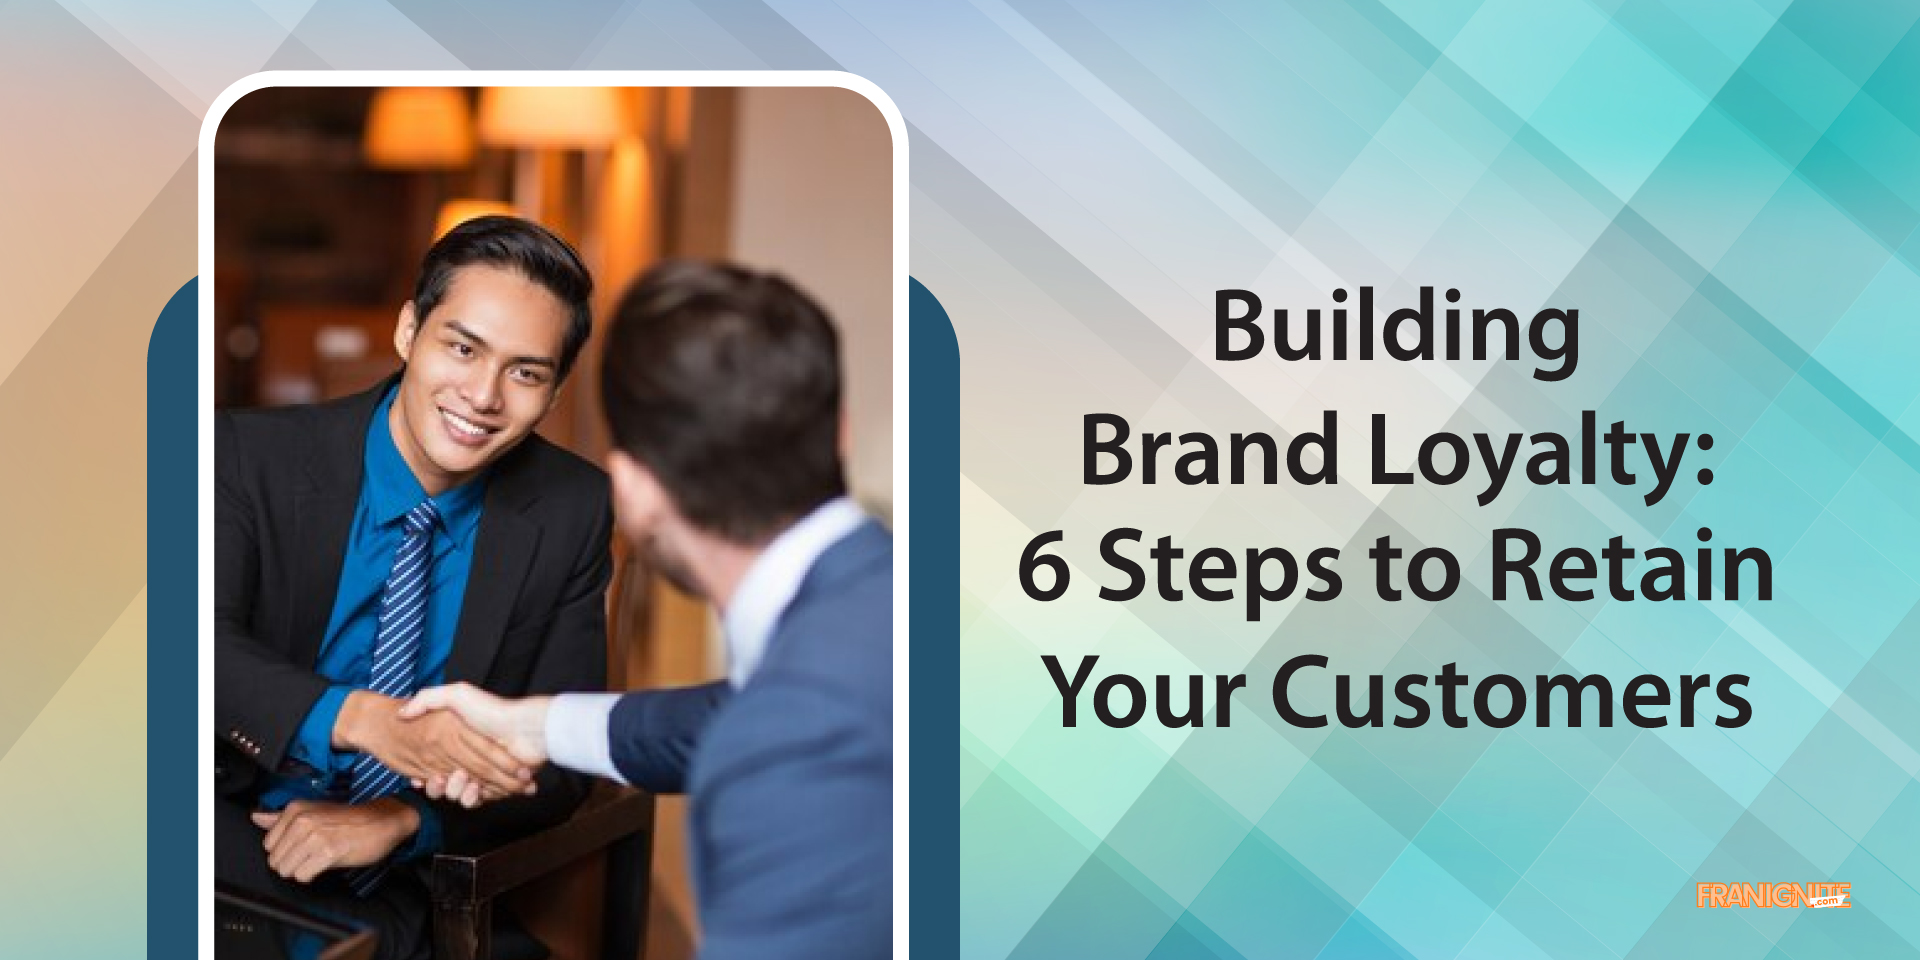 Building Brand Loyalty: 6 Steps to Retain Your Customers